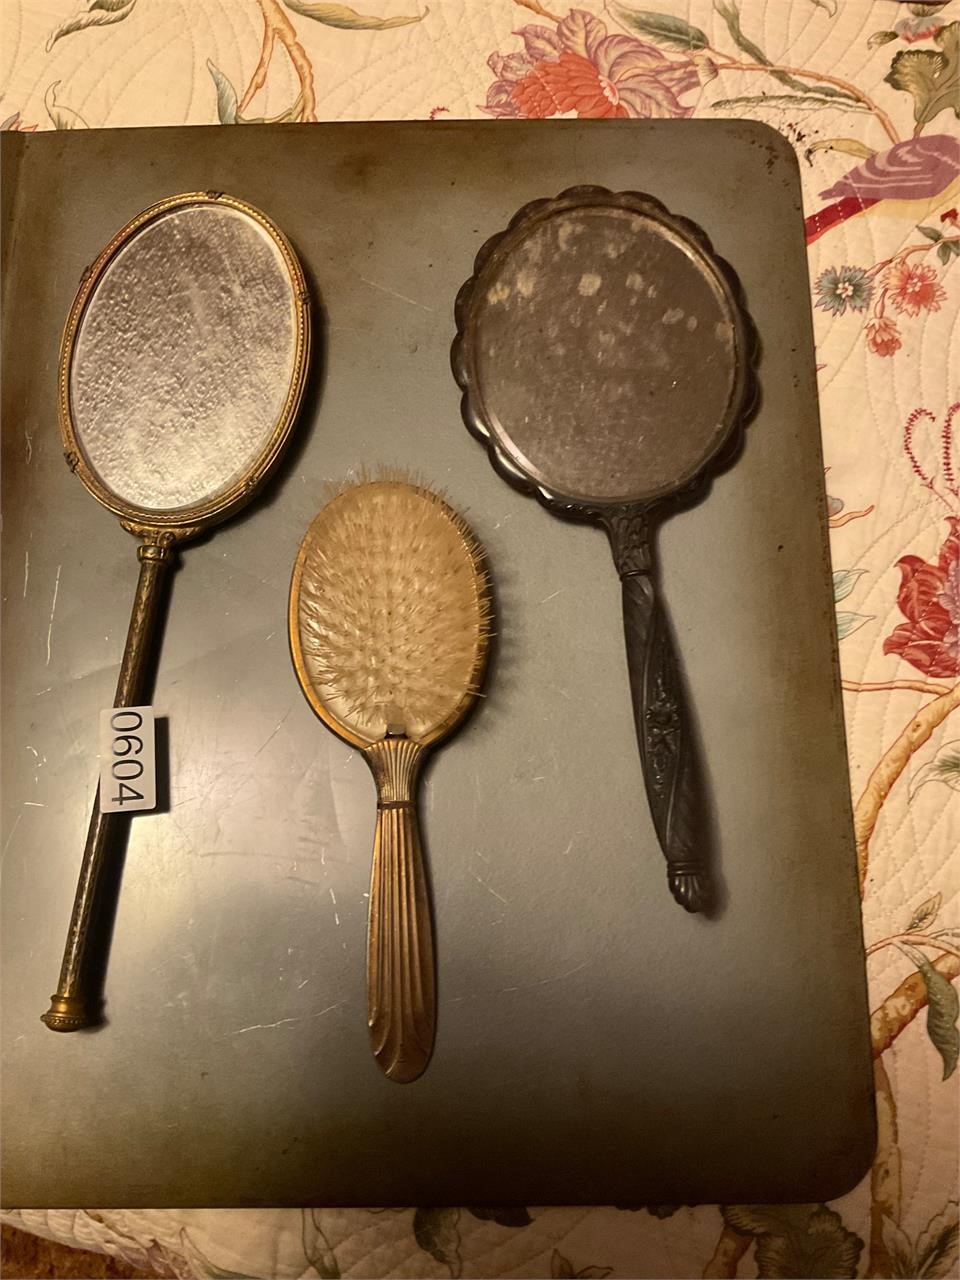 2 vintage hand mirrors and brush